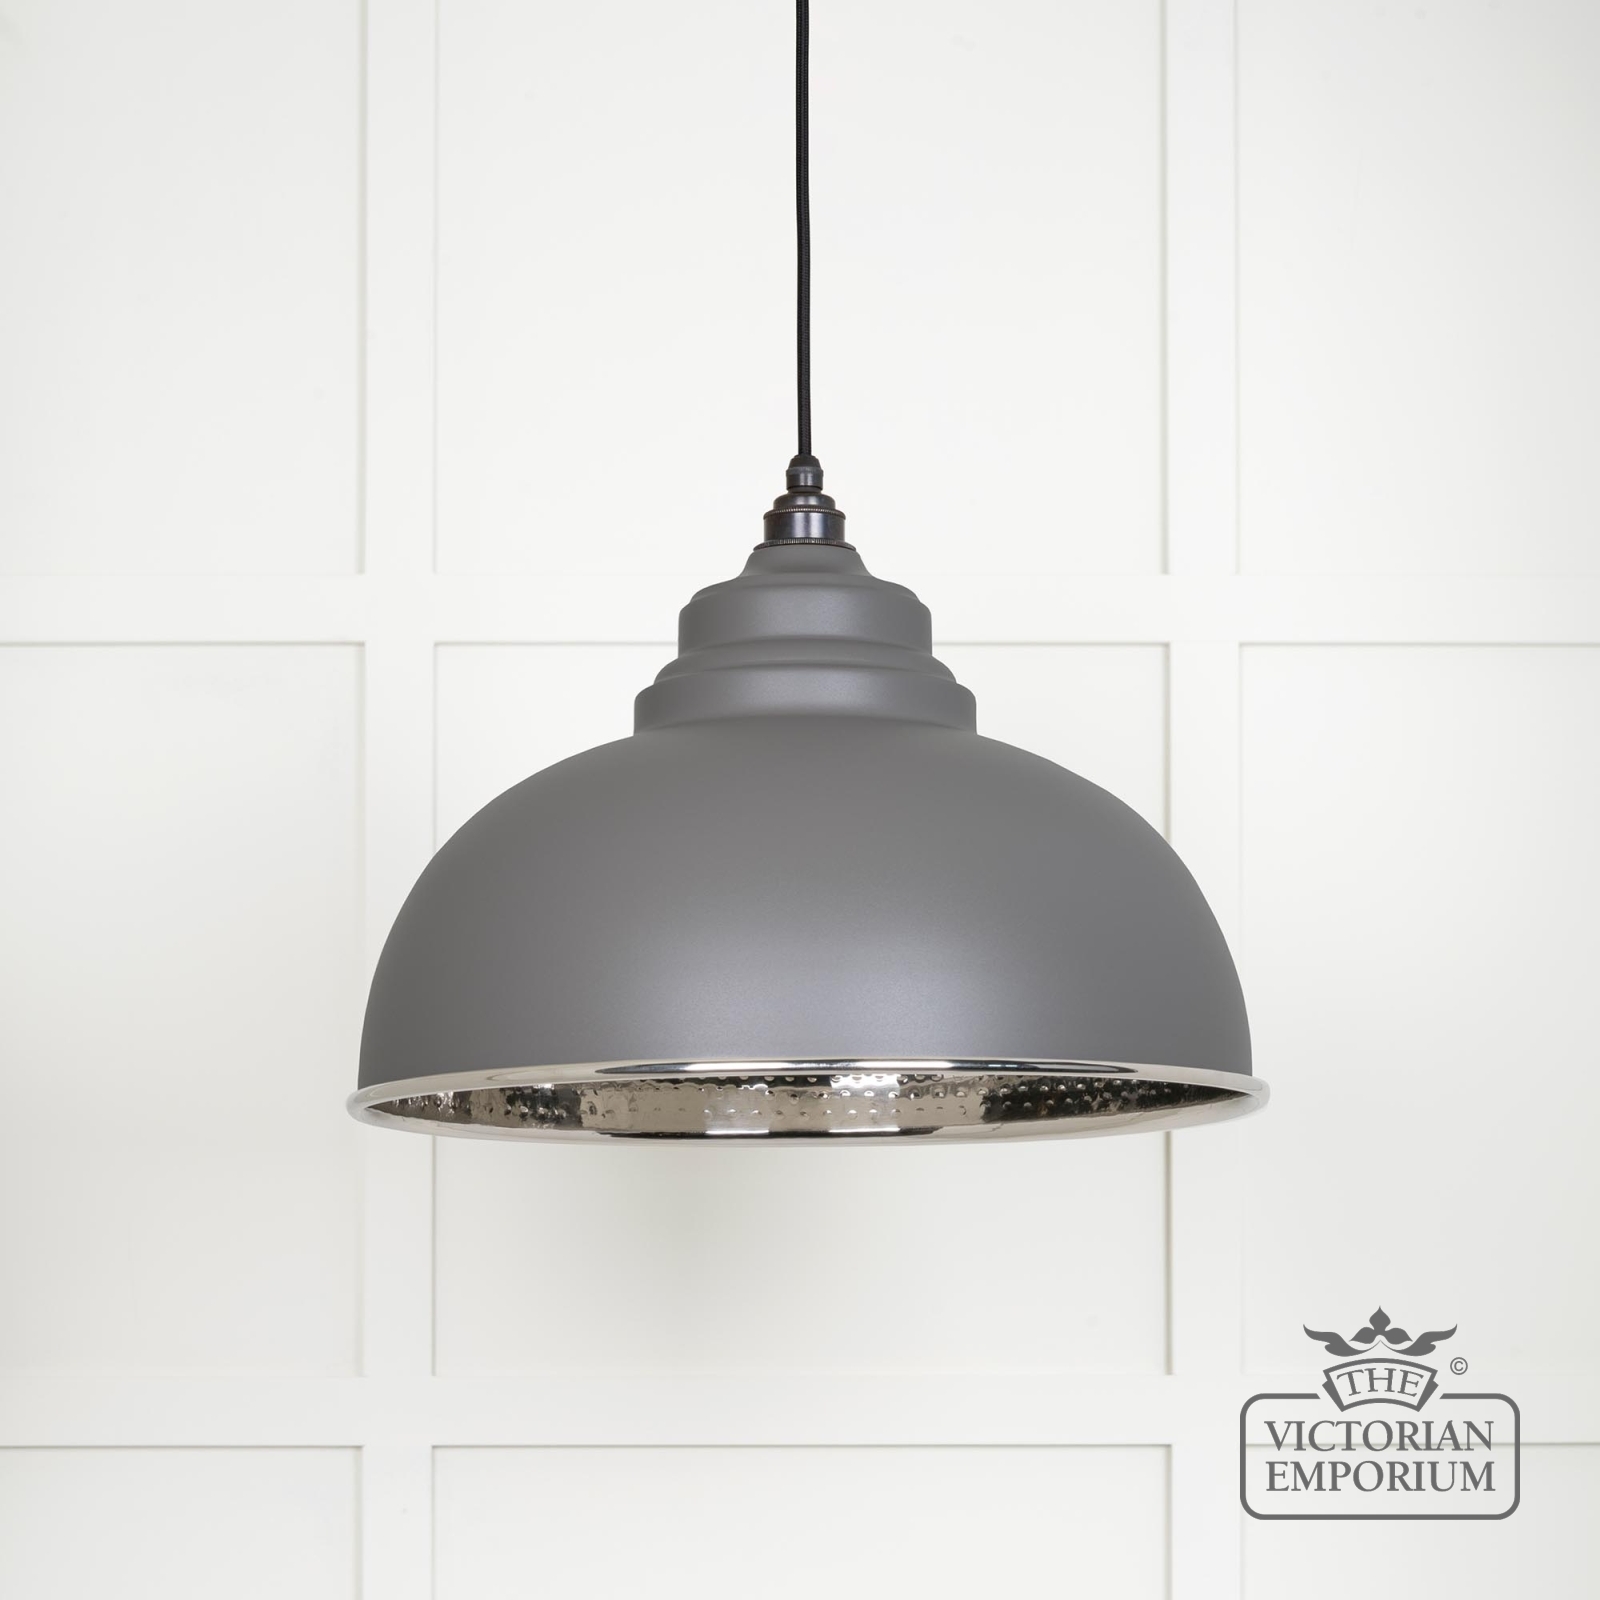 Harlow pendant light in hammered nickel with bluff exterior